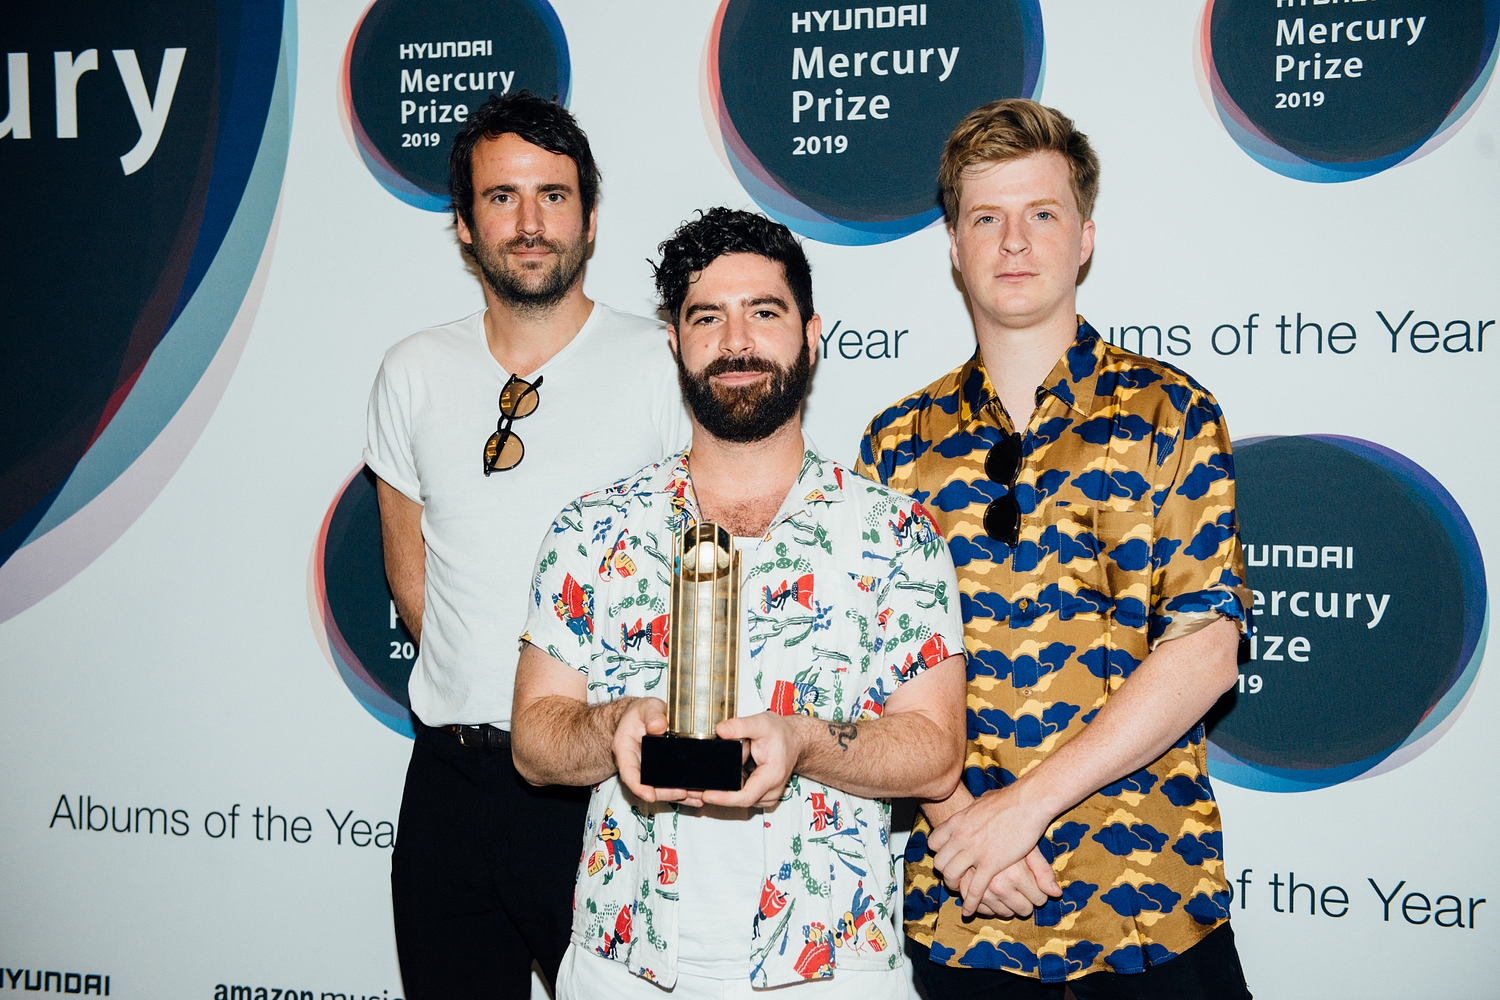 Foals on 2019 Hyundai Mercury Prize nod: “We cracked some drinks!”